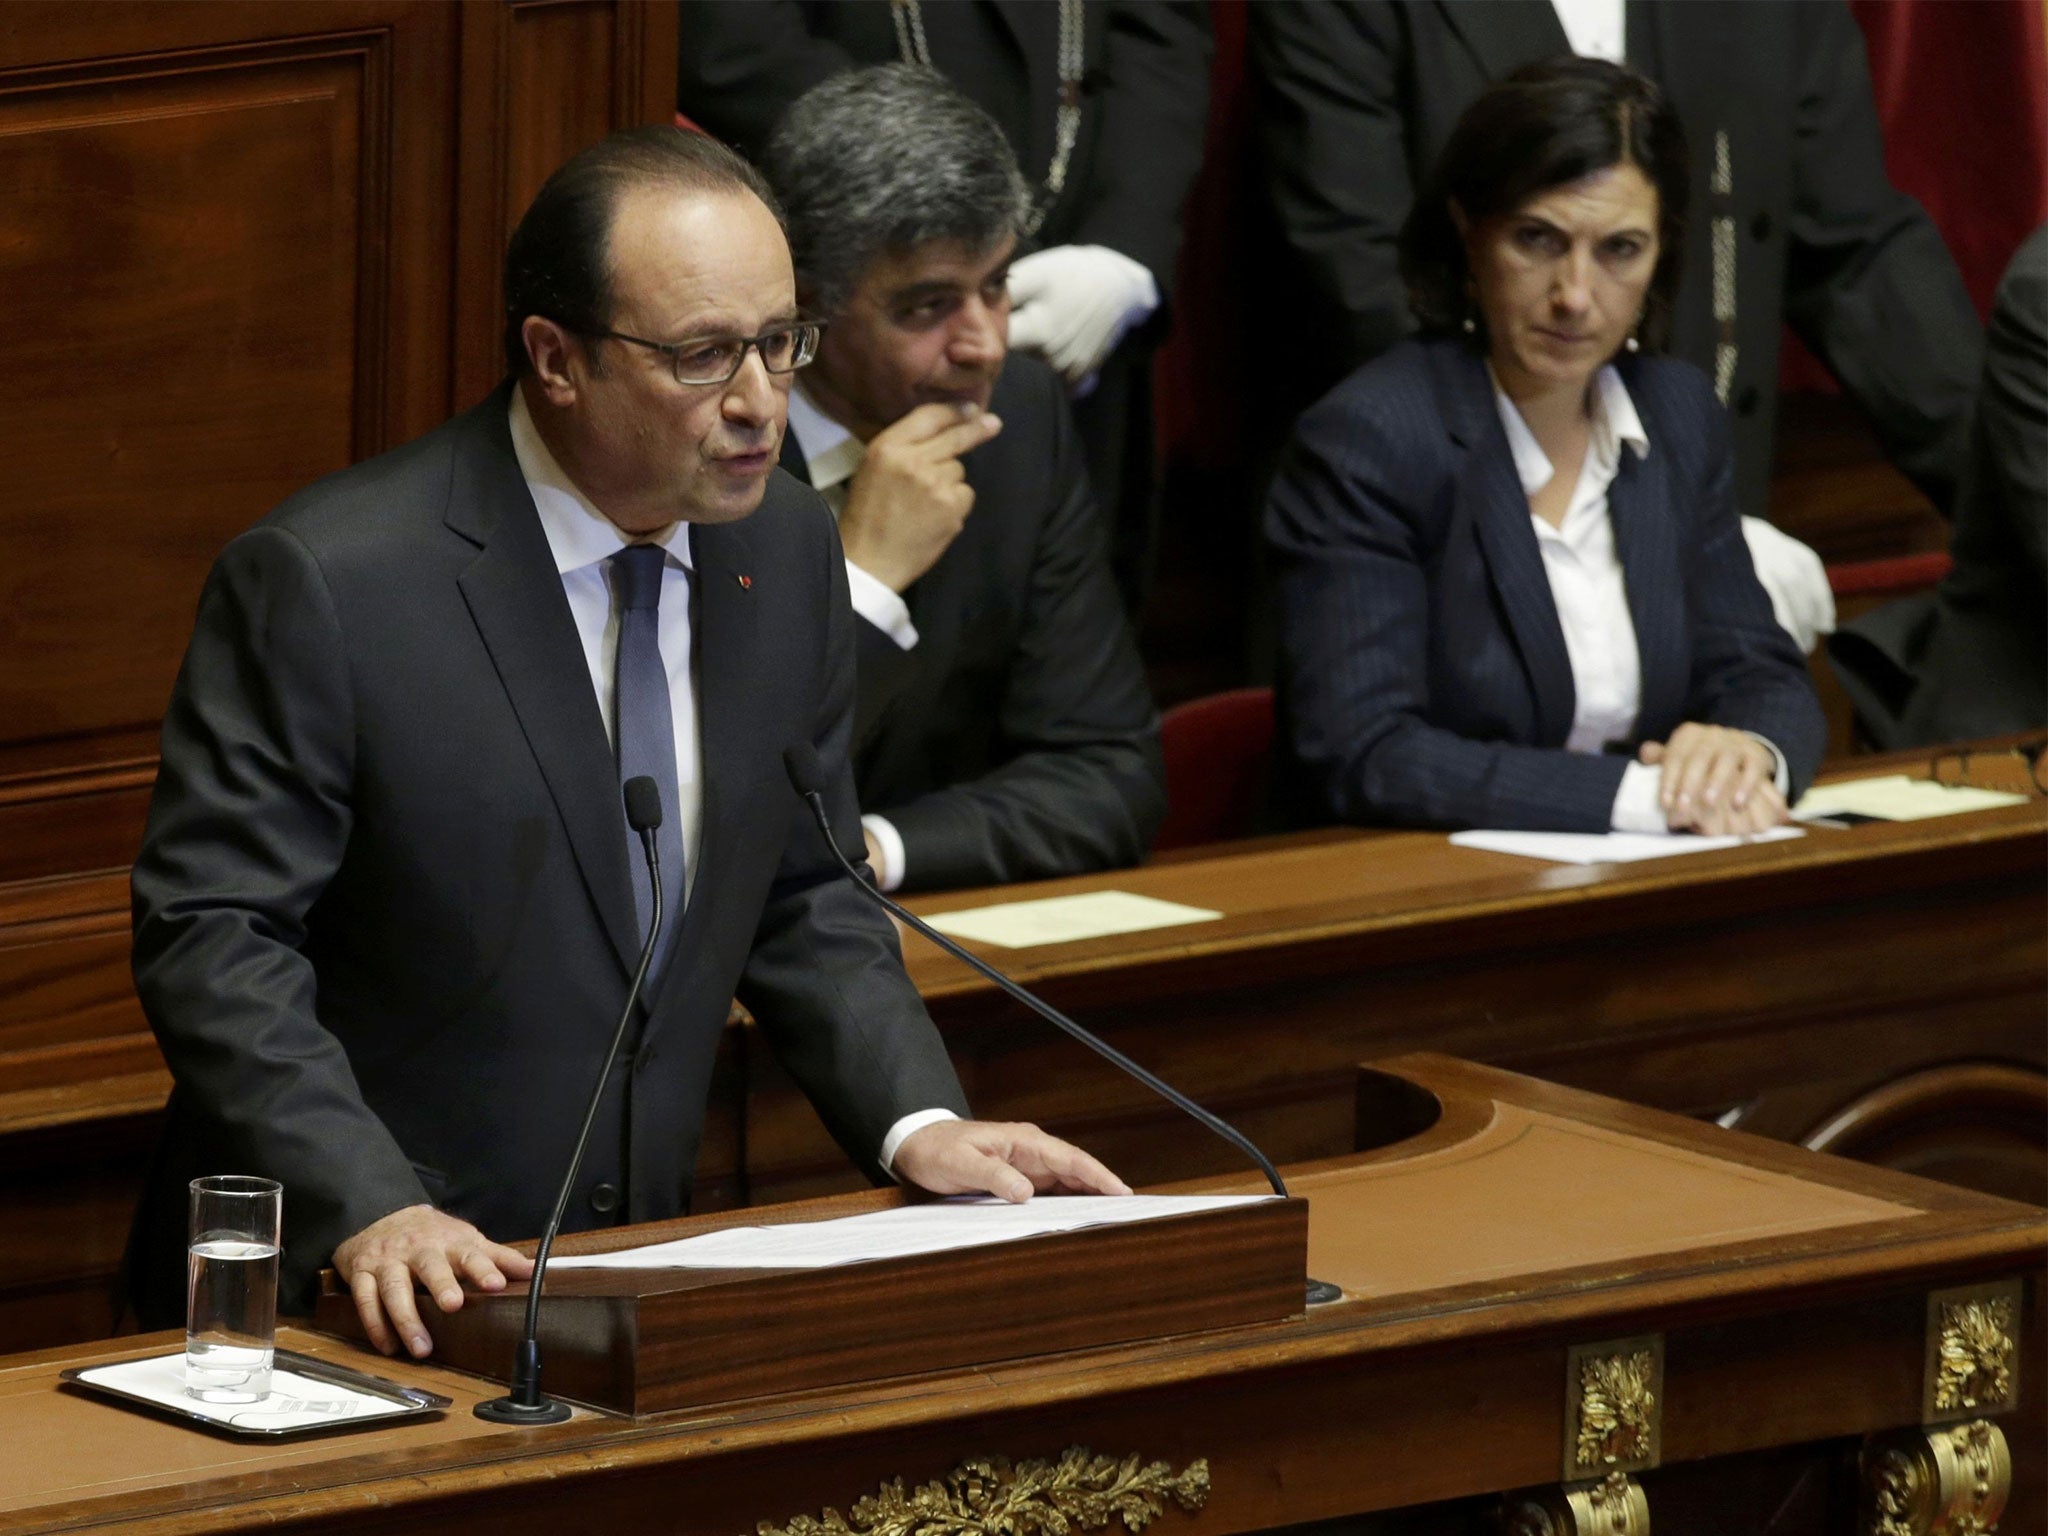 Francois Hollande addresses a joint assembly at the Palace of Versailles